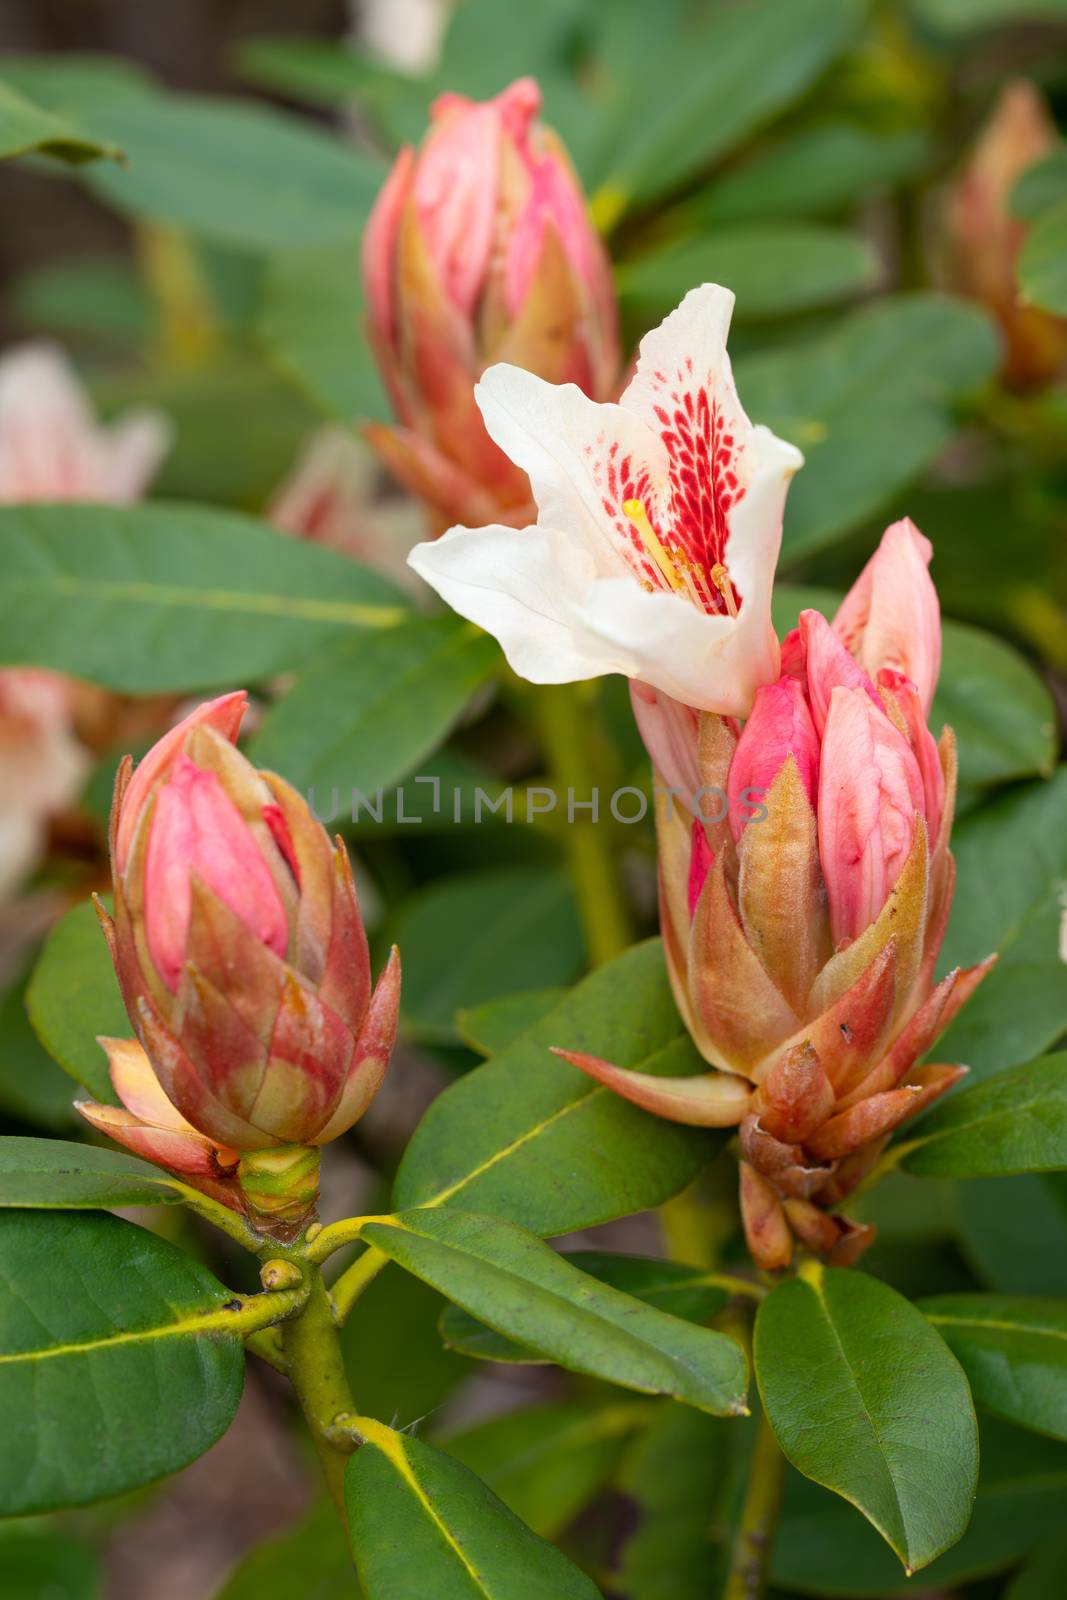 Rhododendron Hybrid Amber Kiss, Rhododendron hybride by alfotokunst